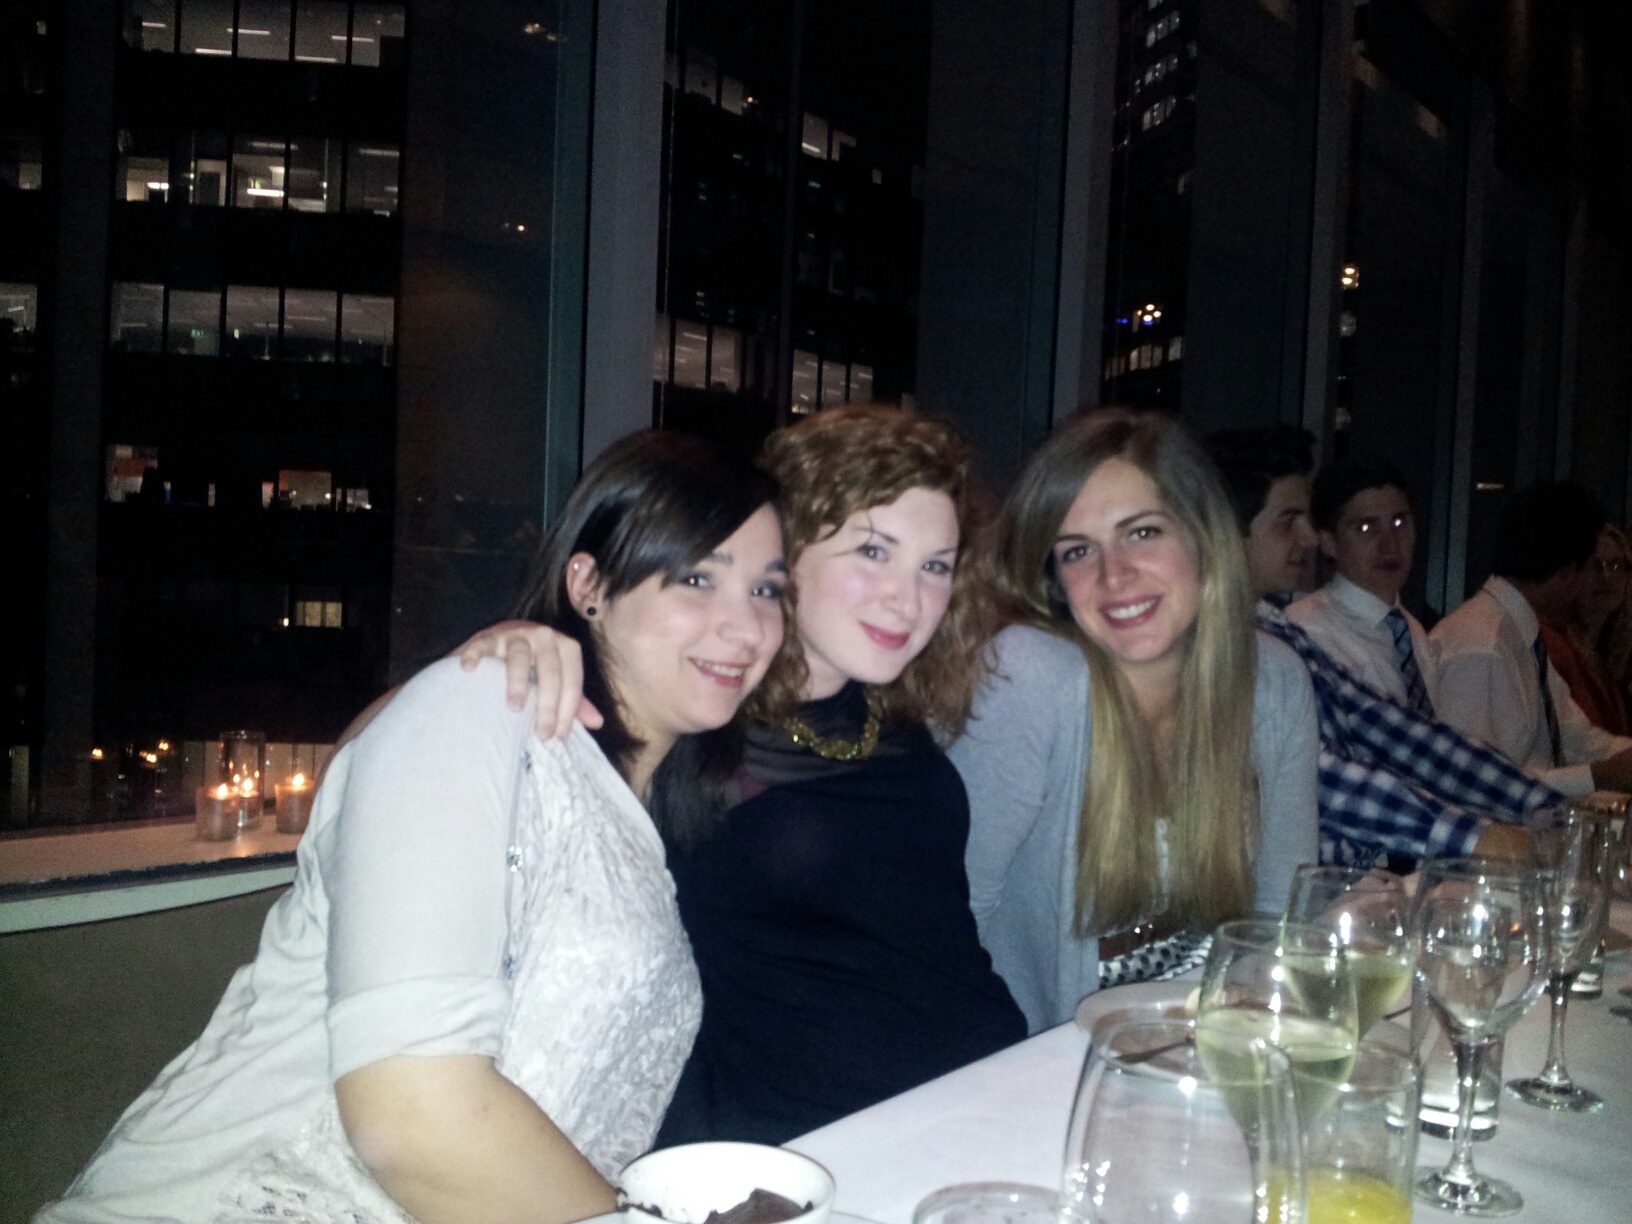 Conference Dinner - with three interns from Italy - Silvia, Elisa and Alessandra